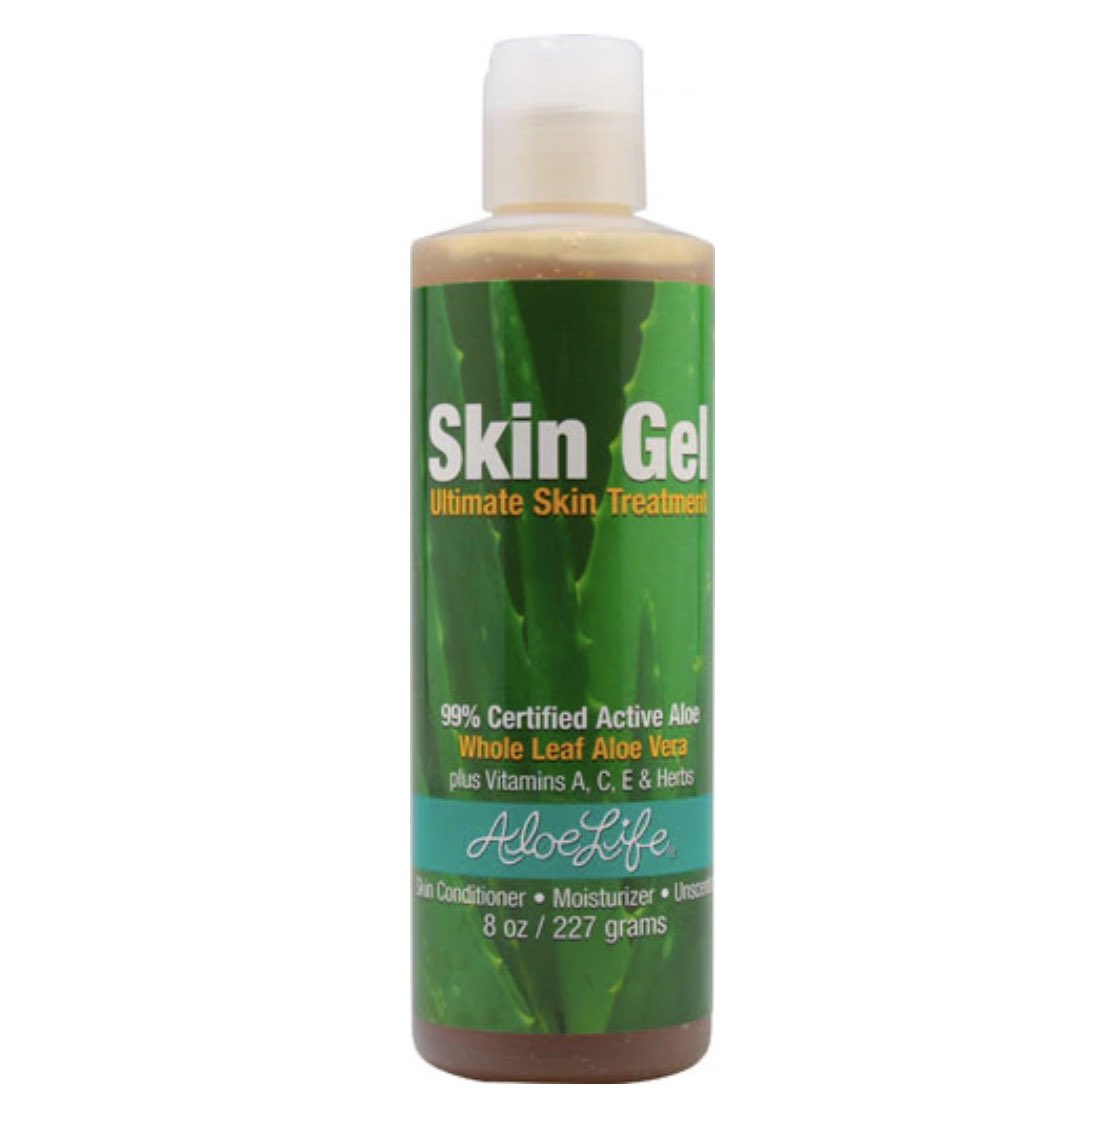 After my shower on days 1 & 2, I go in first with aloe vera gel. My favorite has niacinamide & vitamins A, C, & E. It's a skin conditioner that will help your pores close post-wax.